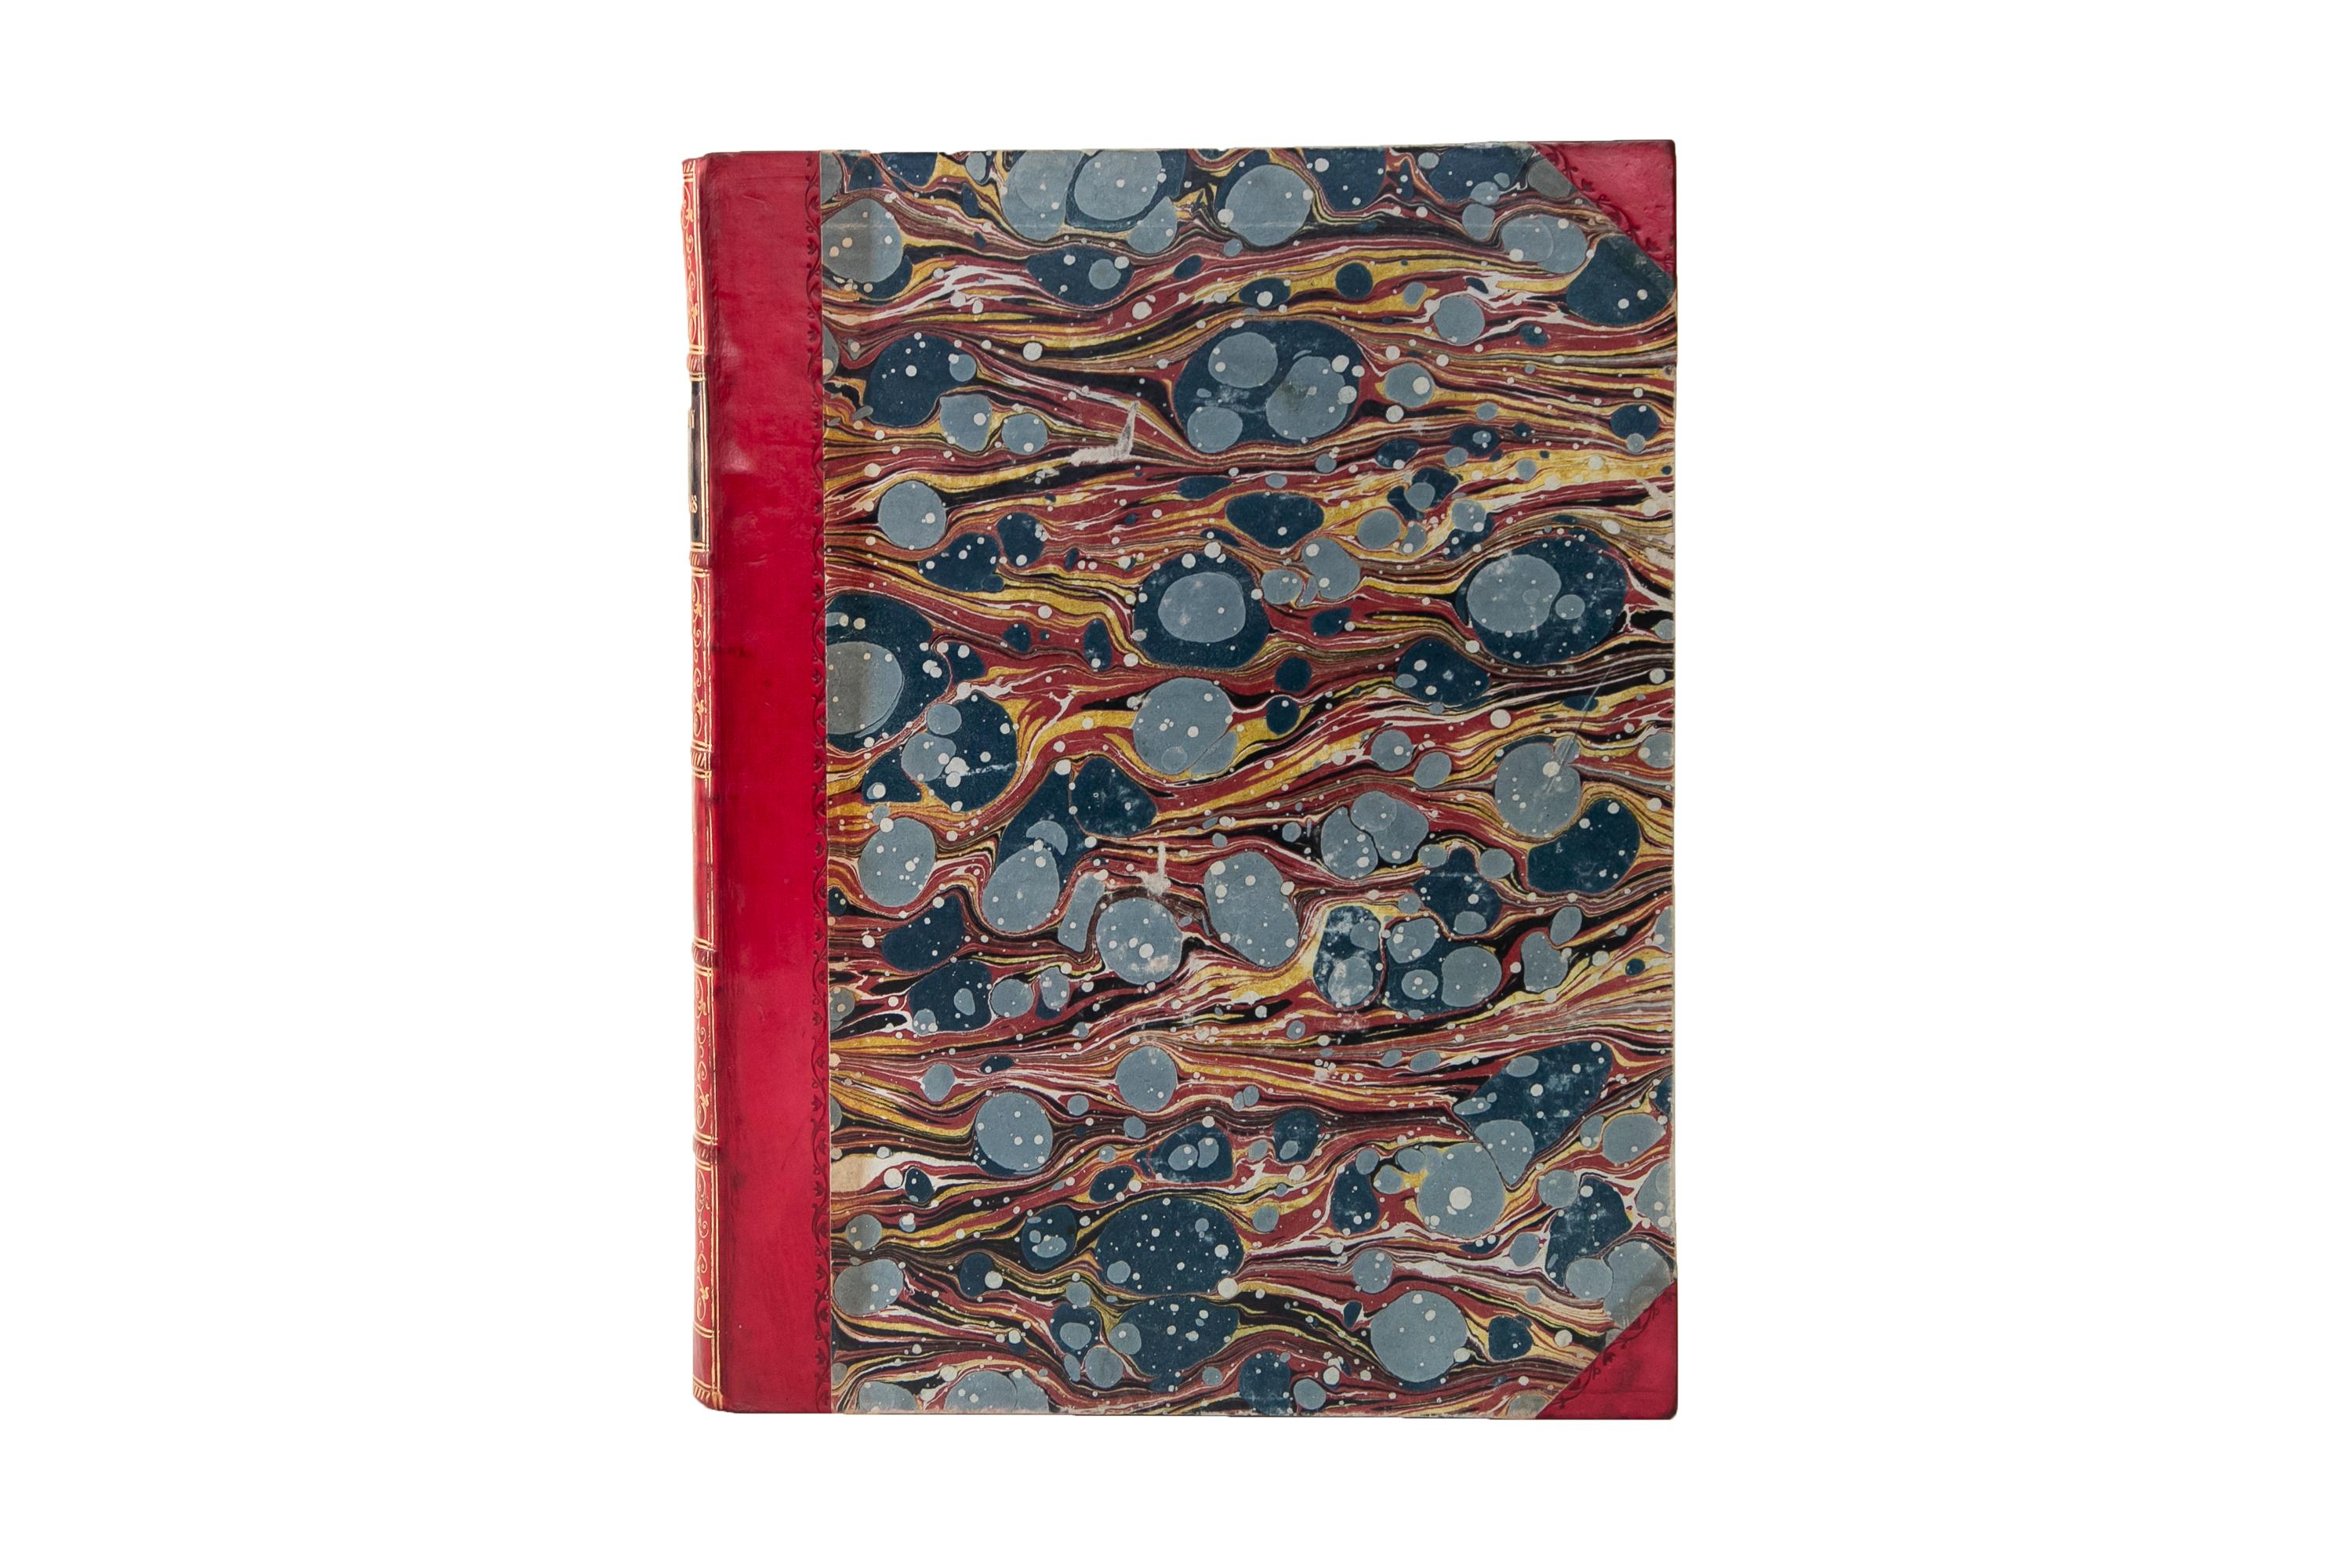 3 Volumes. G.N. Wright, The People's Gallery of Engravings. Bound by John Mylrea in 3/4 red calf and marbled boards bordered in floral open-tooling. The spines display a black morocco label with raised bands, bordering, floral panel details, and